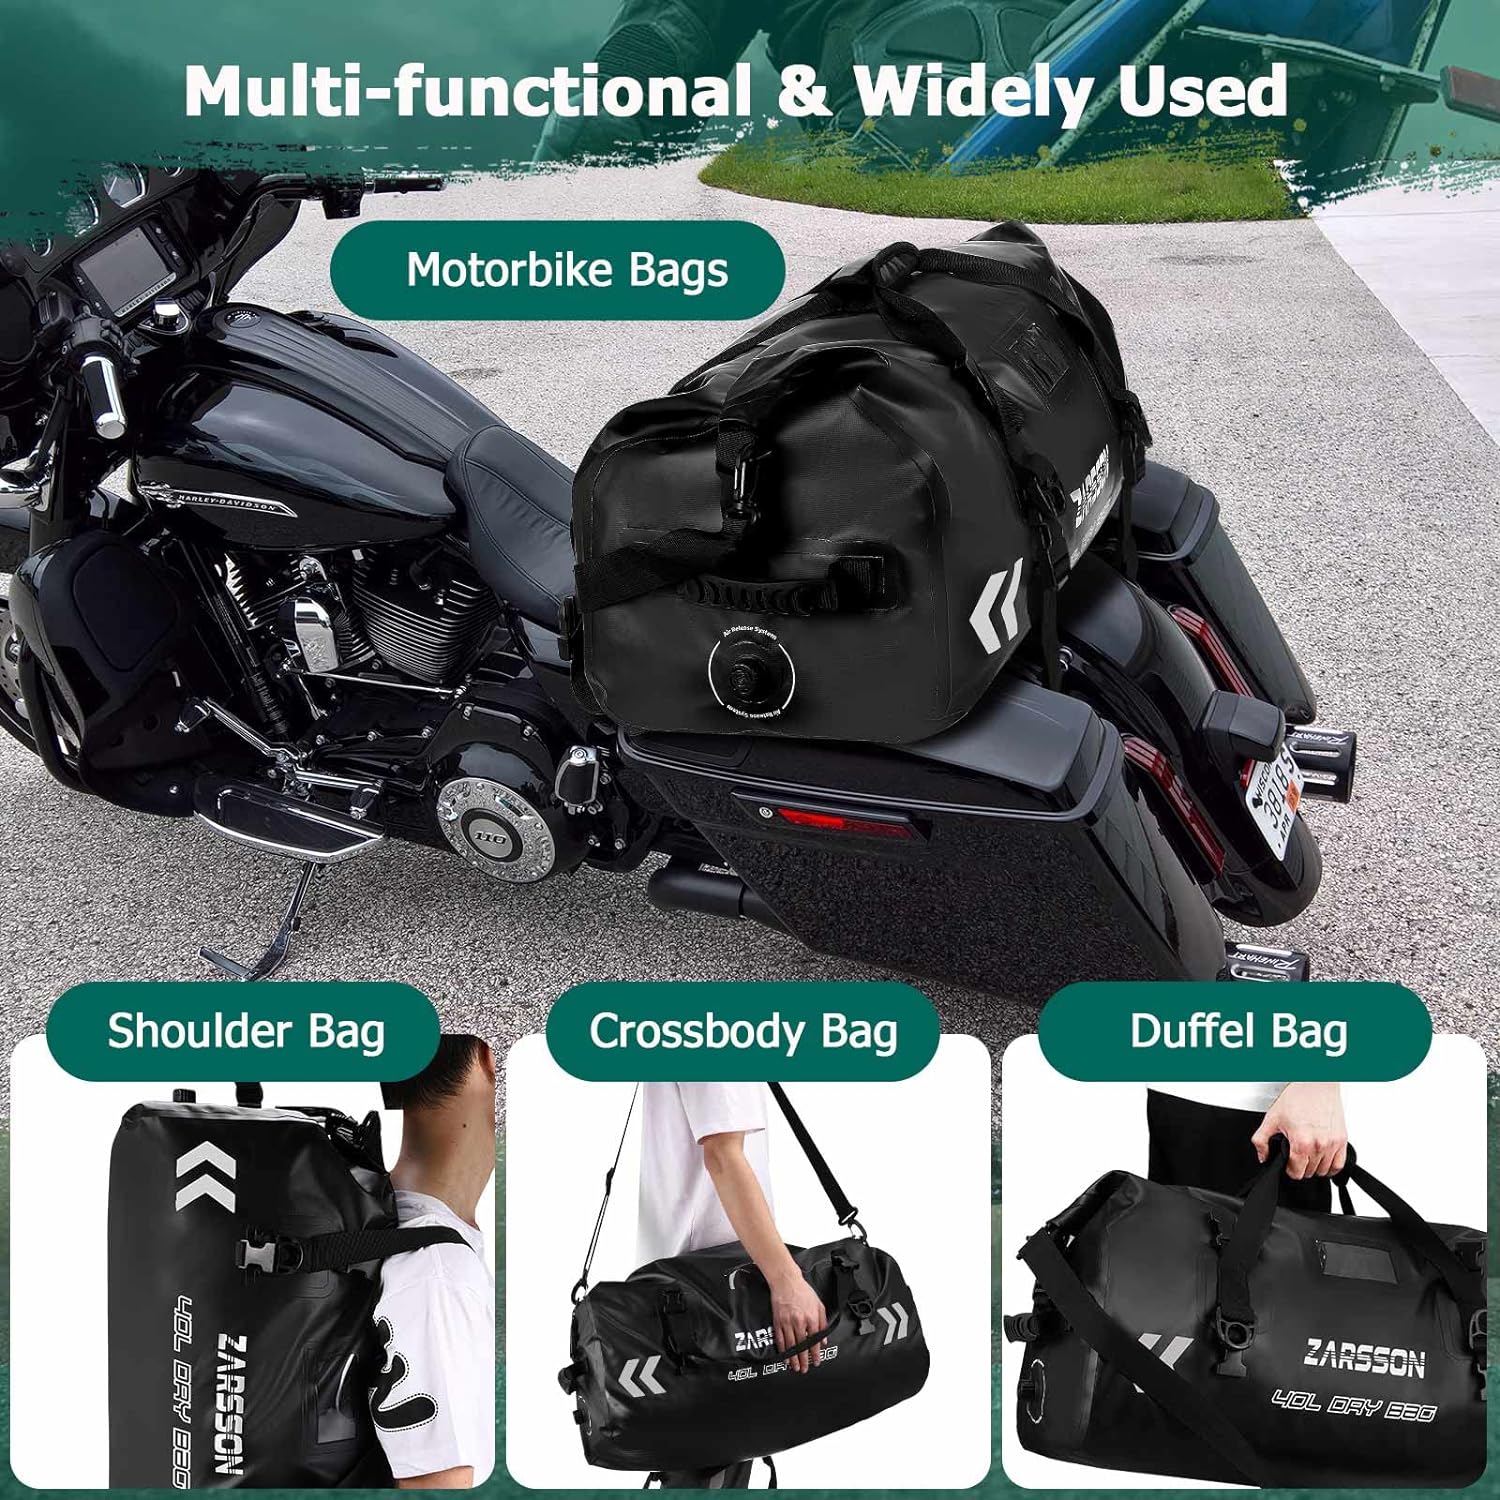 Waterproof Duffel Bag Large Dry Bags Waterproof Motorcycle Dry Bag 40L/66L for Travel Duffle Drybag Heavy Duty Roll Top Closure with Molle Loops Durable Straps and Handles for Kayaking Camping Boating